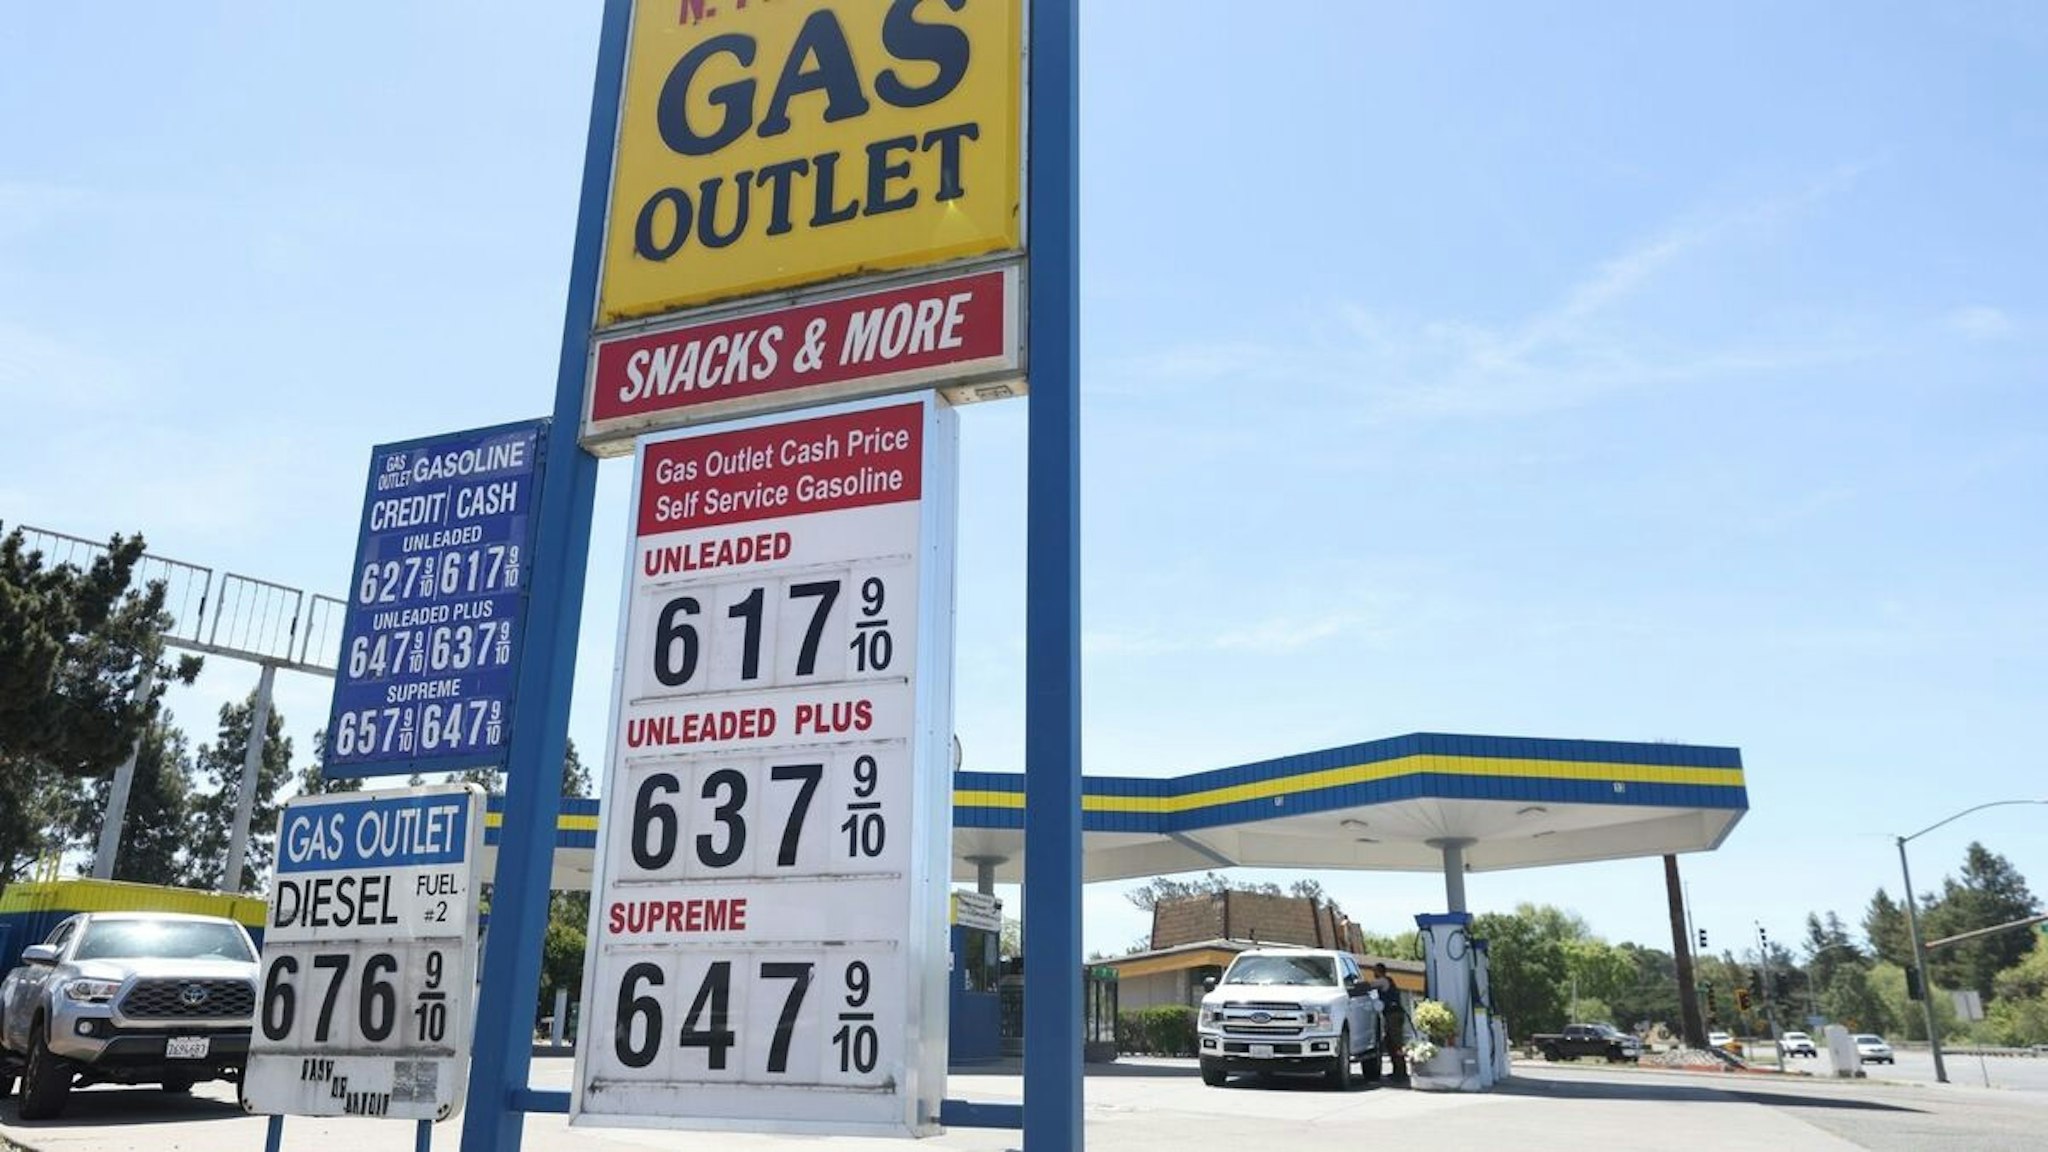 PETALUMA, CALIFORNIA - MAY 18: Gas prices over $6.00 per gallon are displayed at a gas station on May 18, 2022 in Petaluma, California. Gas prices in California have surpassed $6.00 per gallon for the first time ever. The average price per gallon of regular unleaded gasoline in California is at $6.05 and $6.29 in the San Francisco Bay Area.